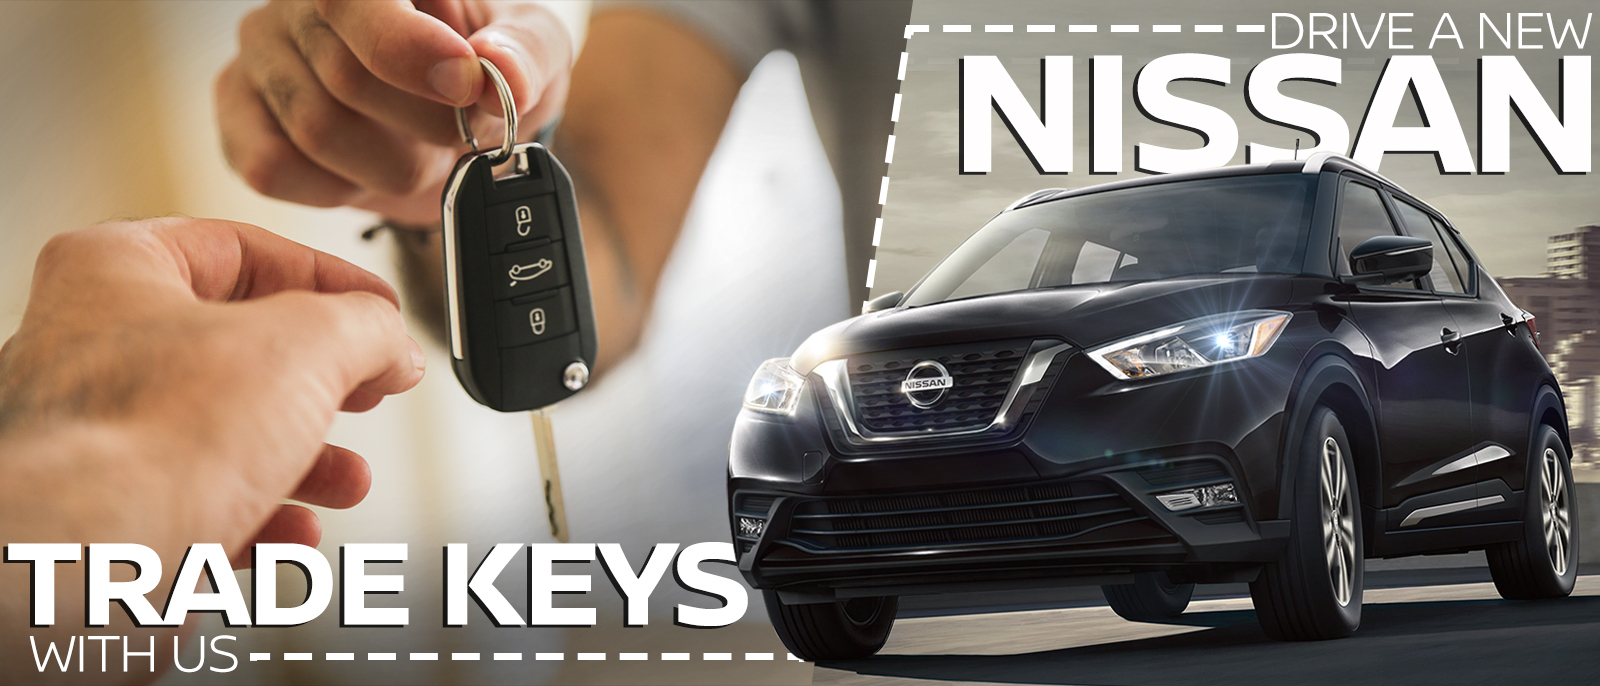 Trade Keys With Us & Drive A New Nissan!